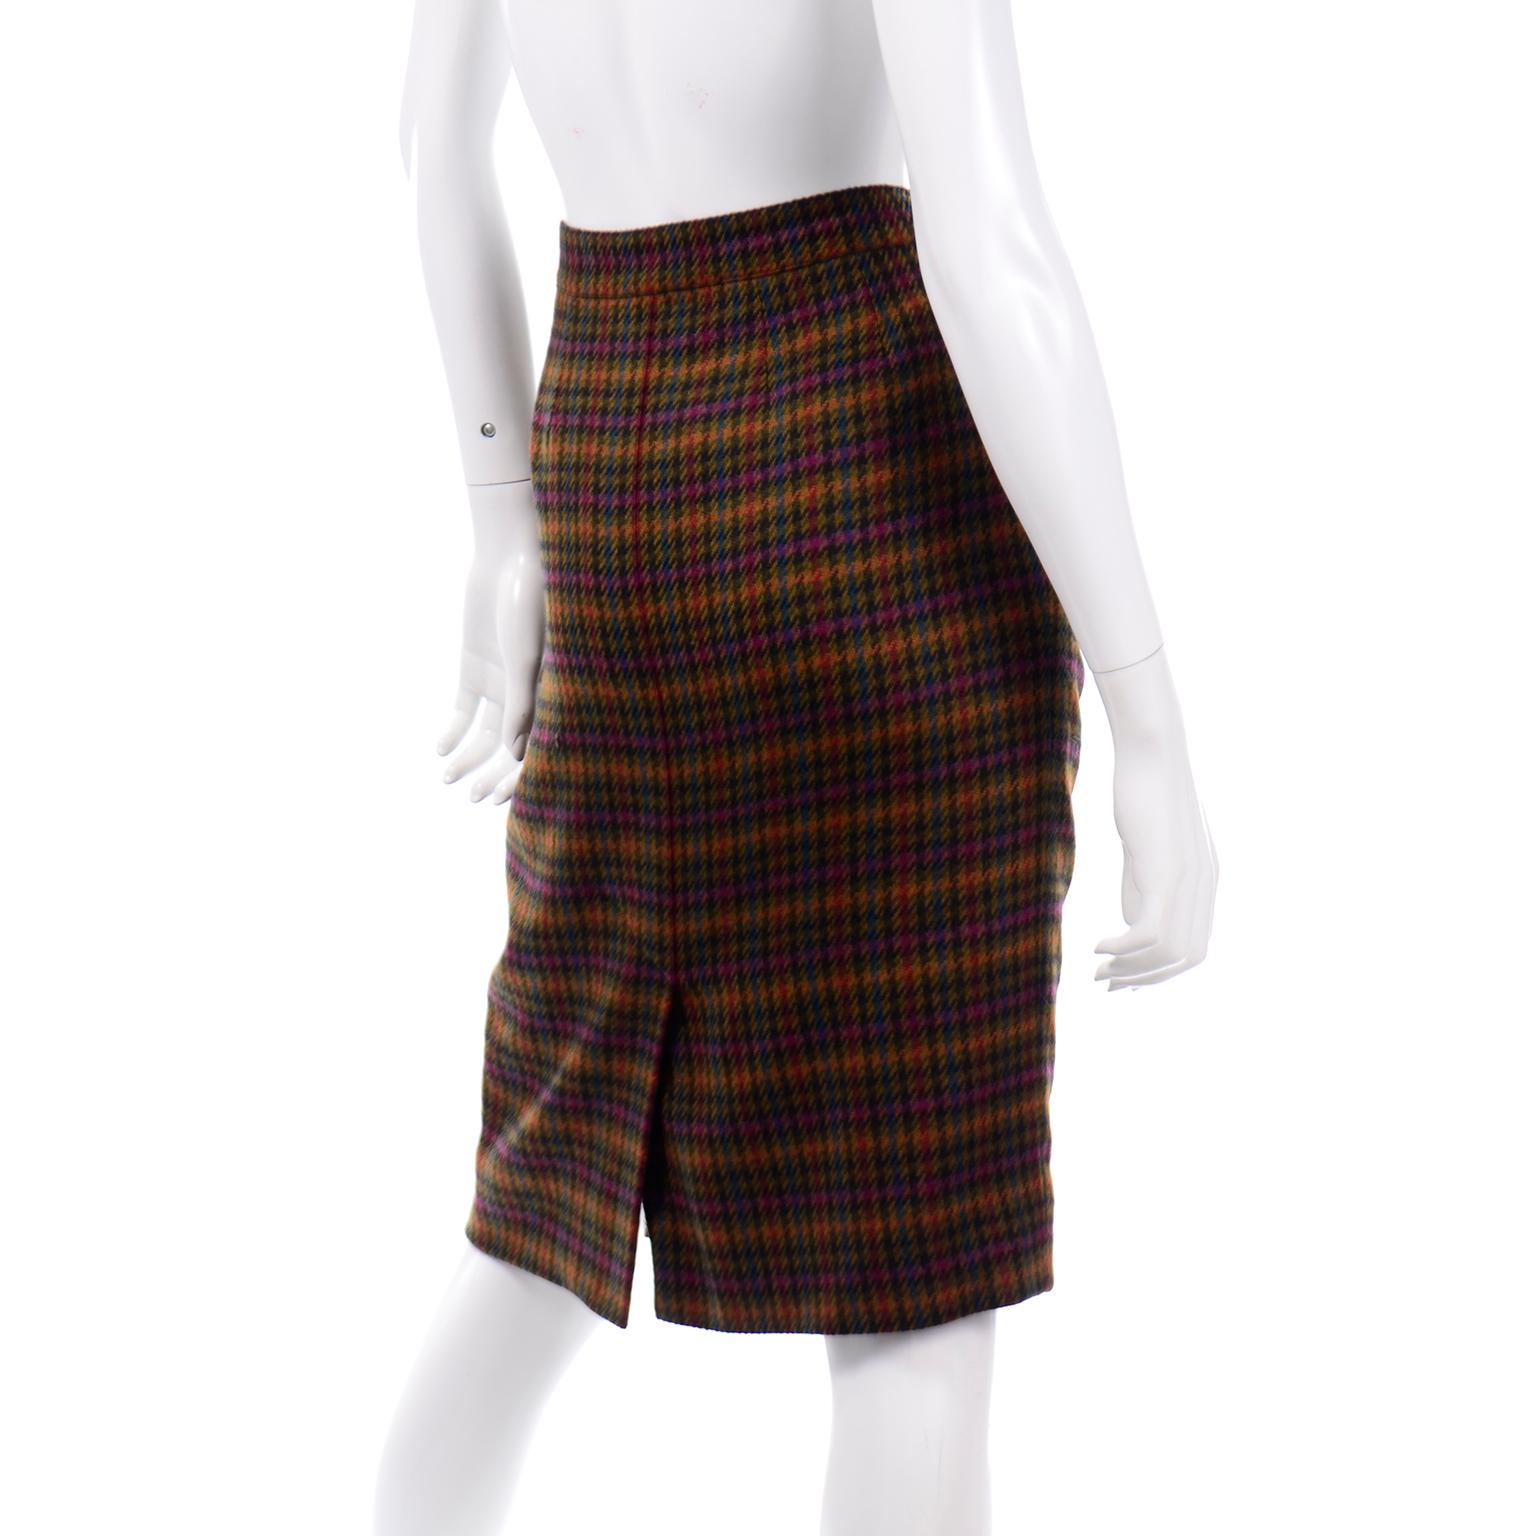 1970s Vintage Hermes Plaid Multi Colored Wool Pencil Skirt In Excellent Condition For Sale In Portland, OR